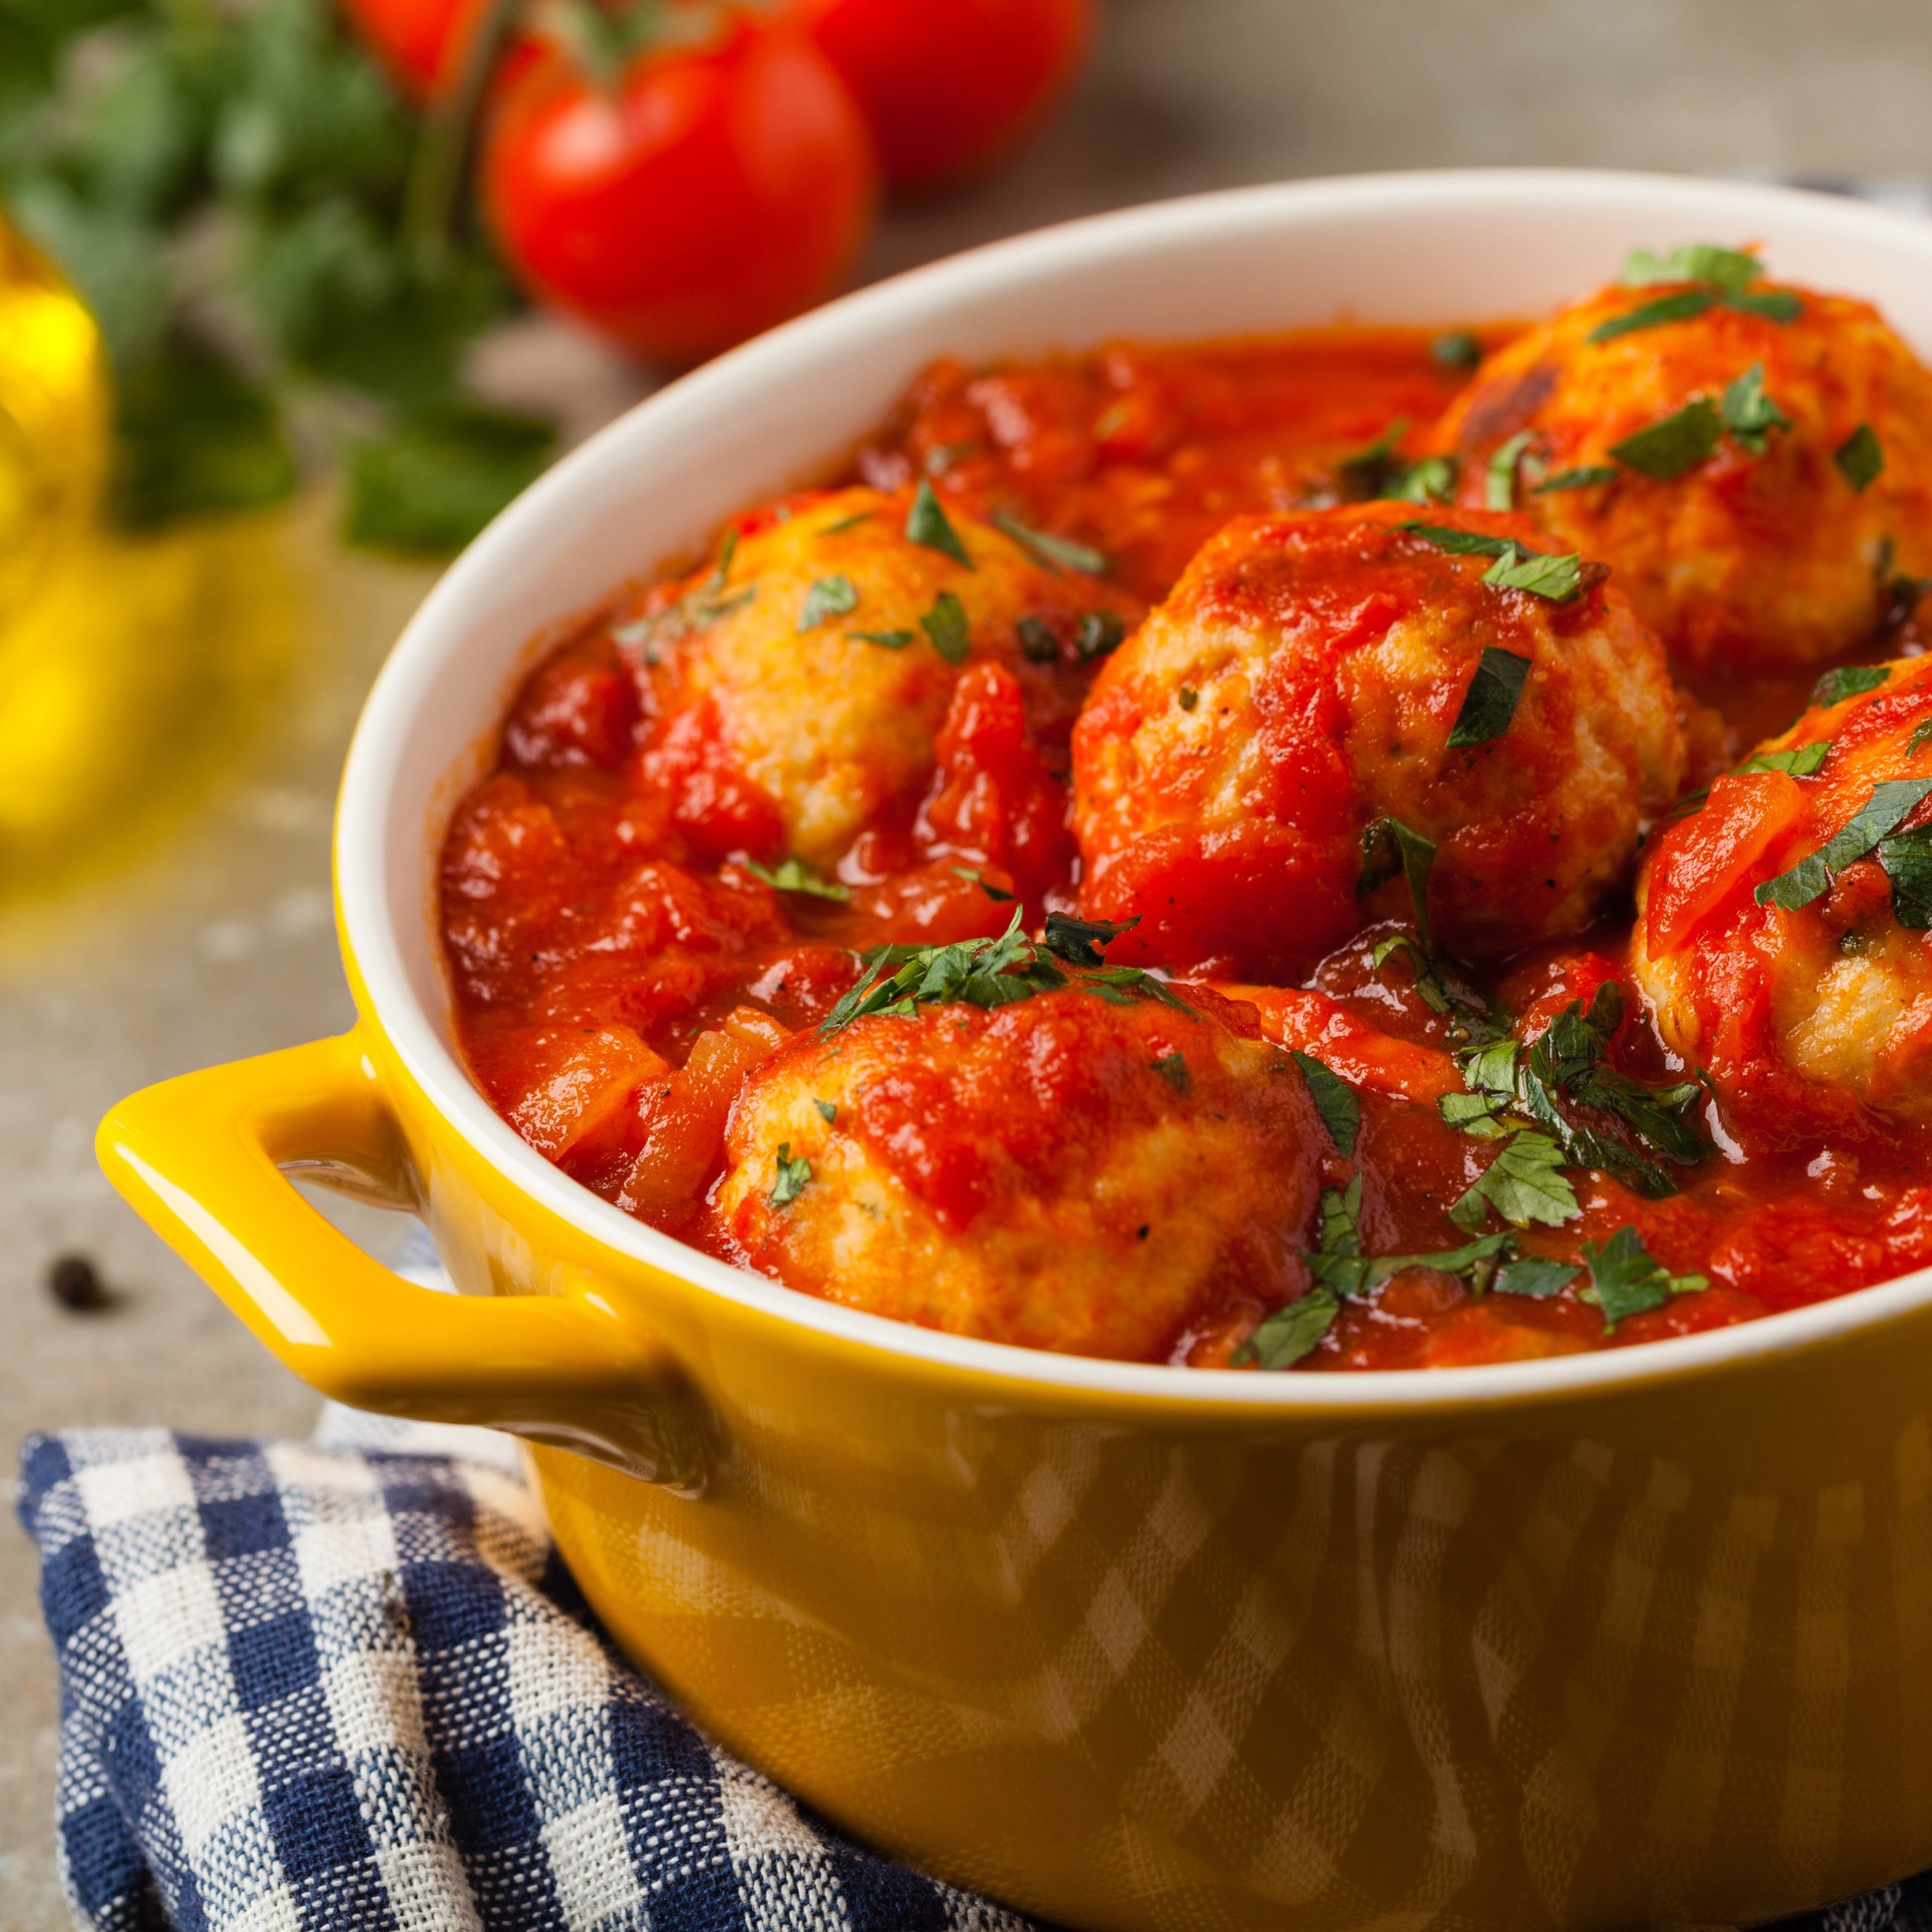 Chicken meatballs with tomato sauce. Served with rice. Front view. Stone background.